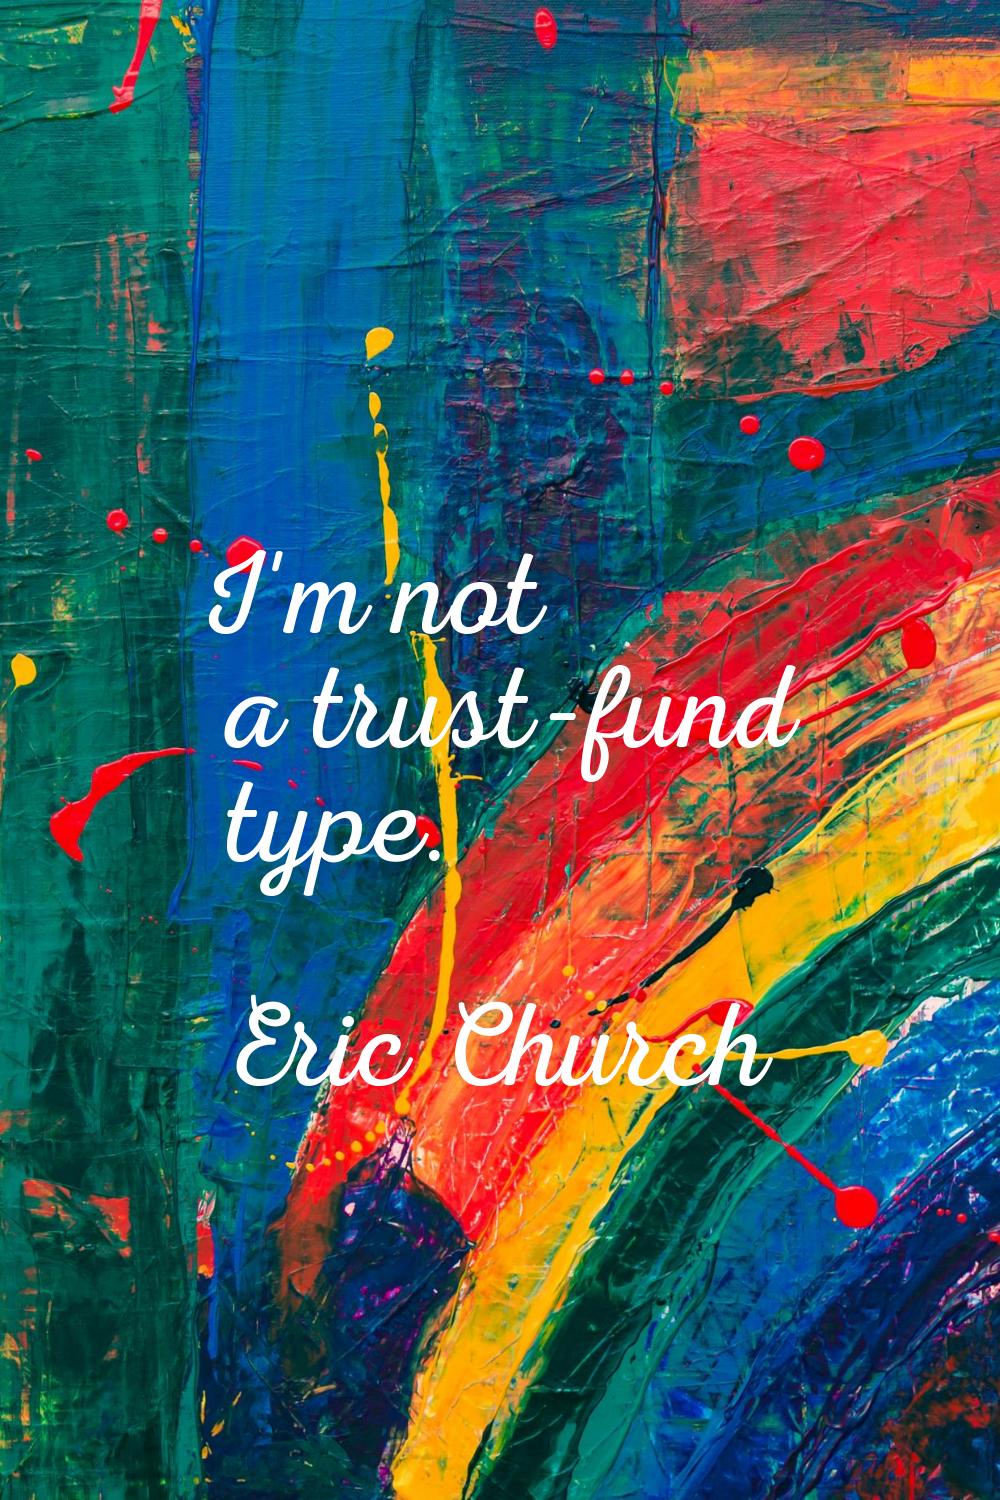 I'm not a trust-fund type.